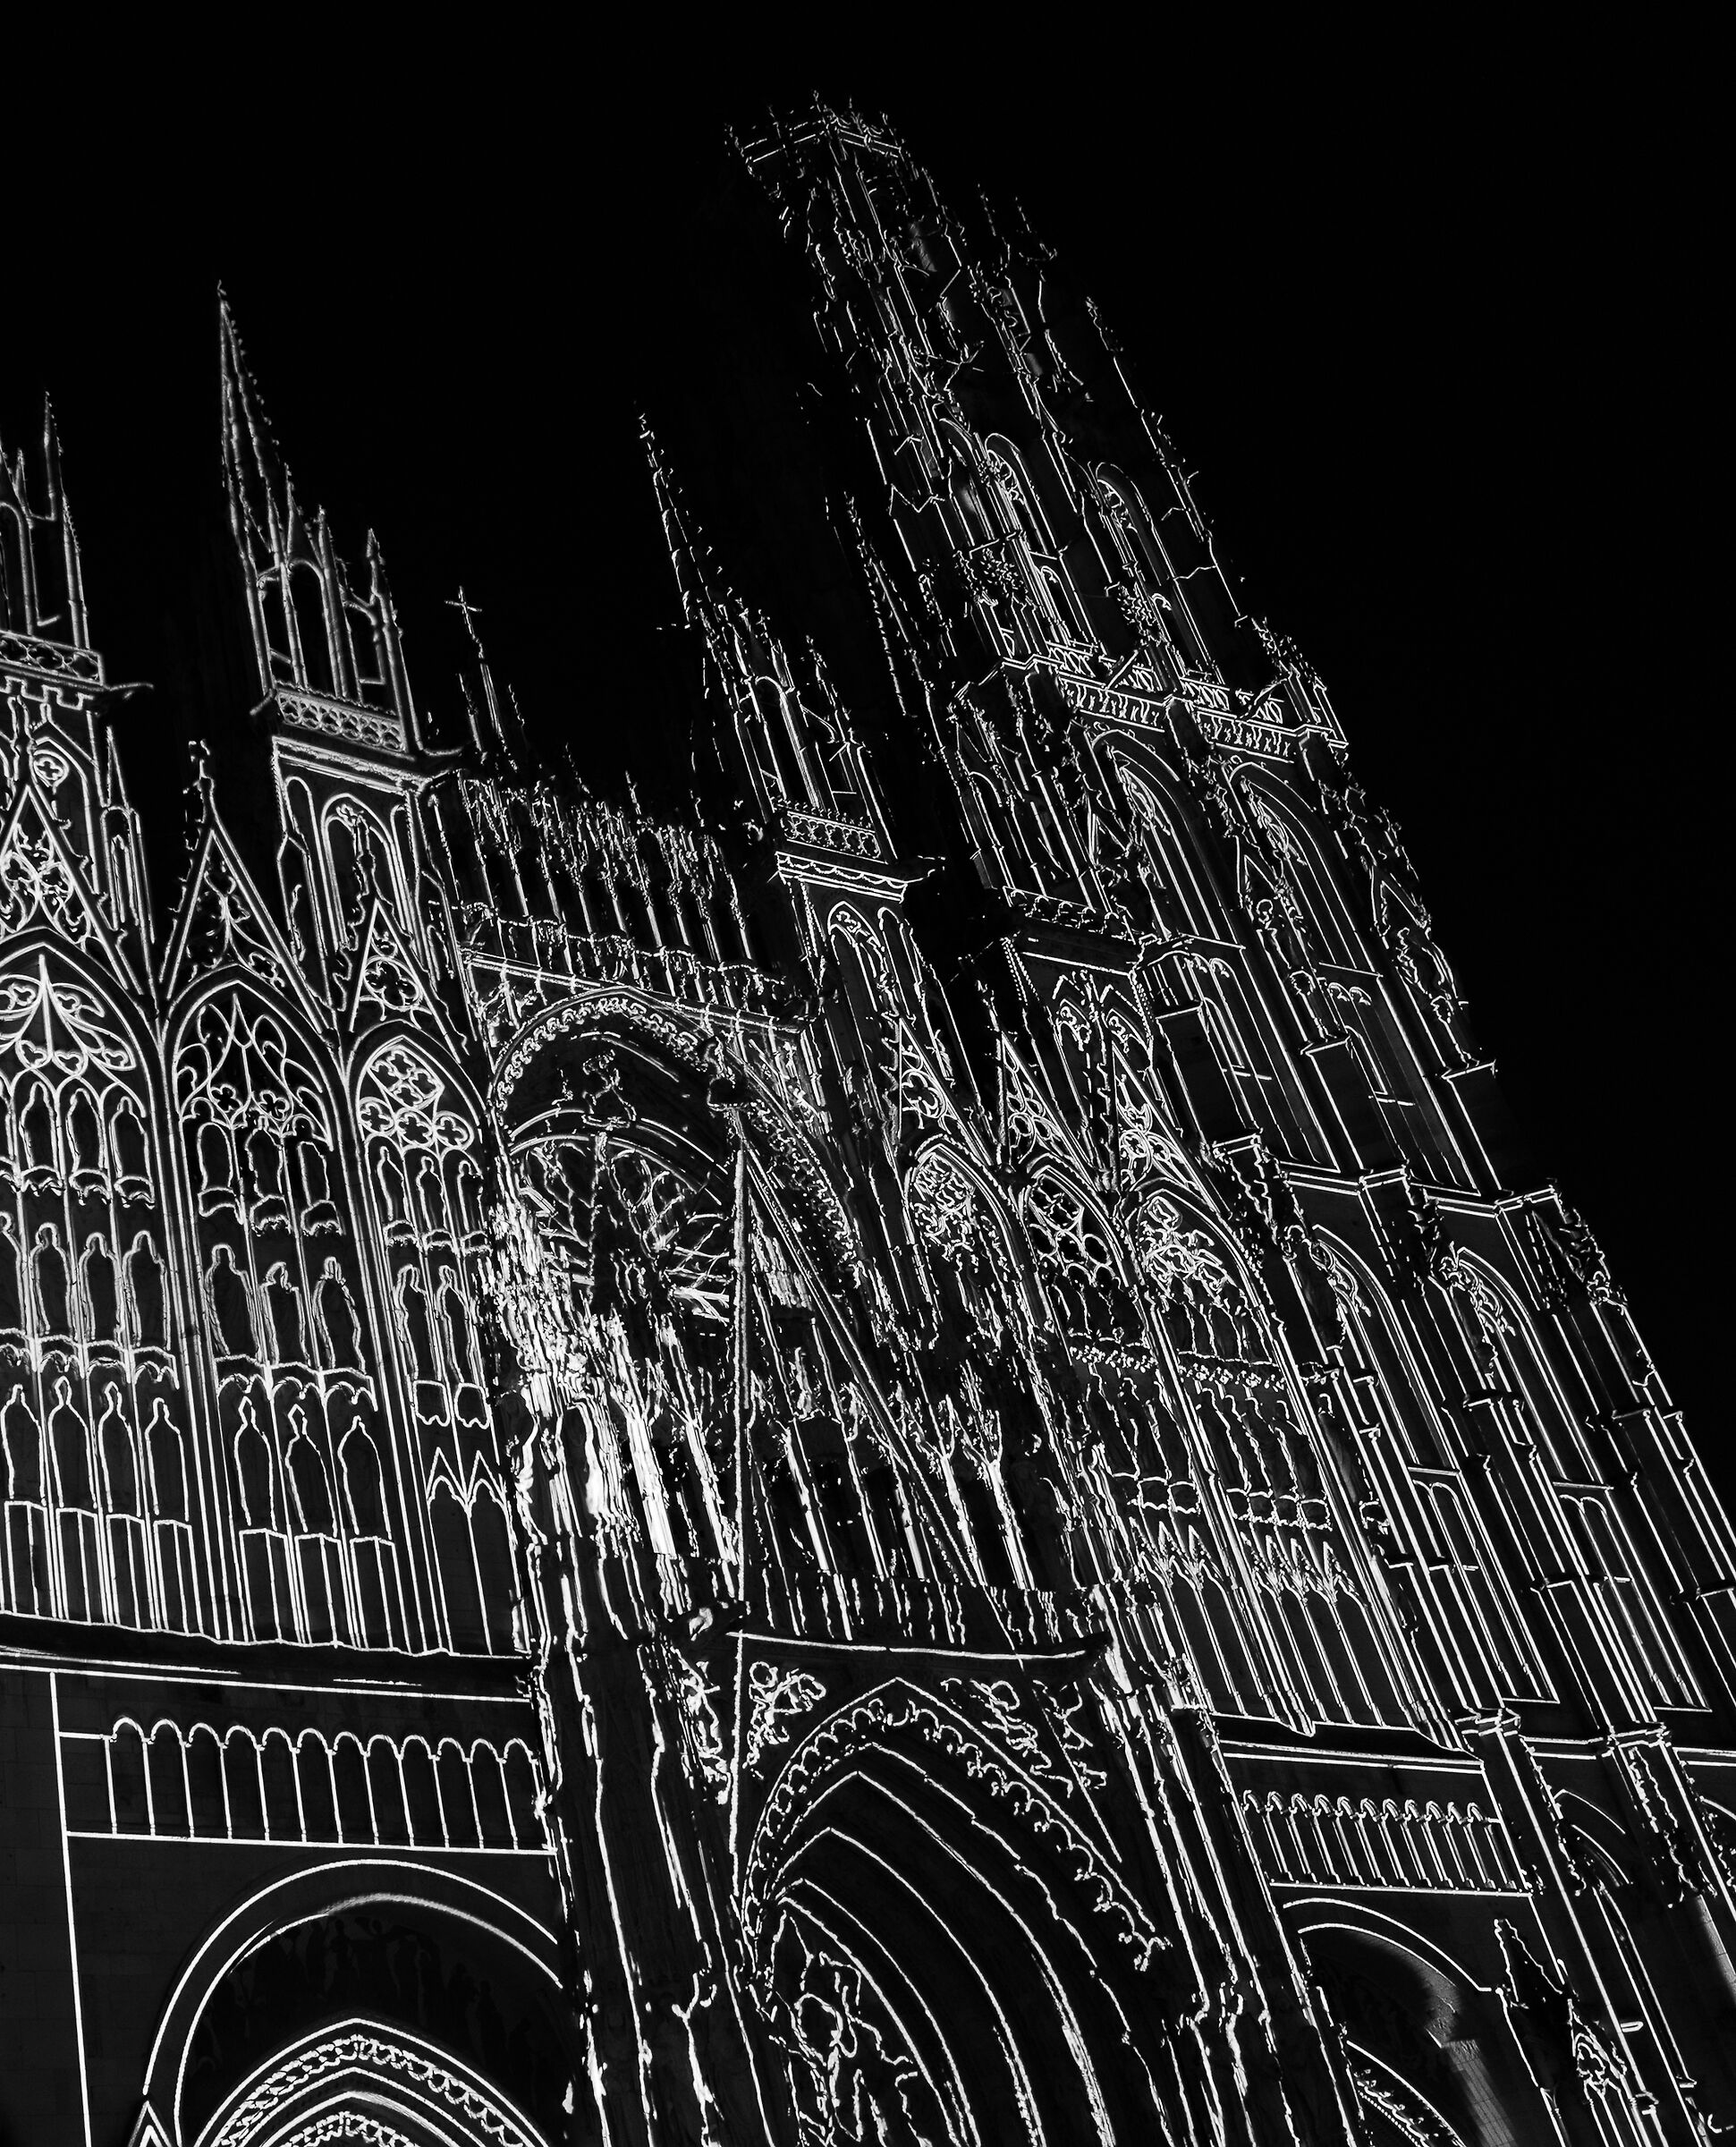 Screenings on Rouen Cathedral...